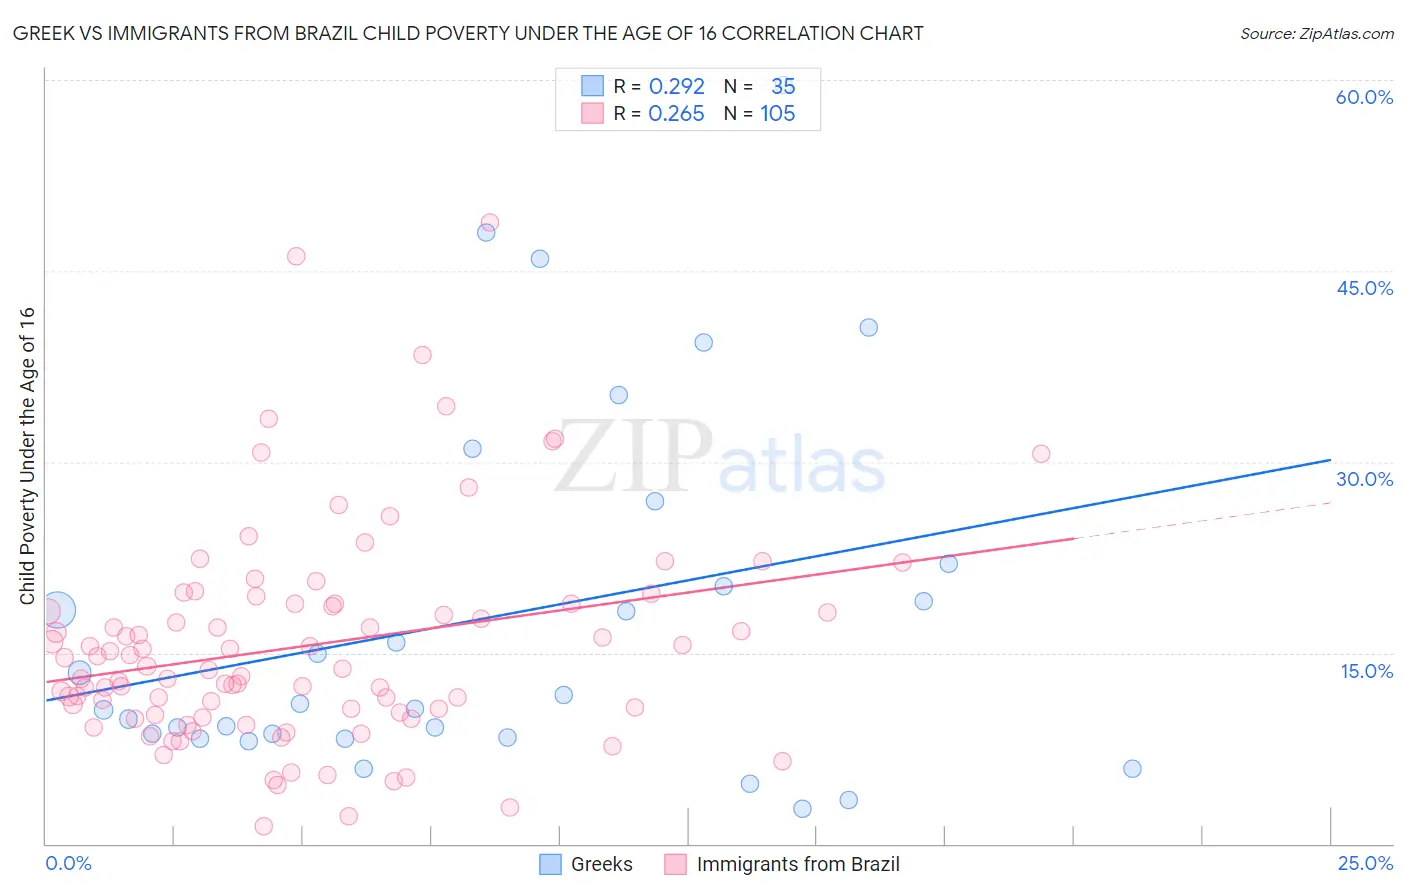 Greek vs Immigrants from Brazil Child Poverty Under the Age of 16